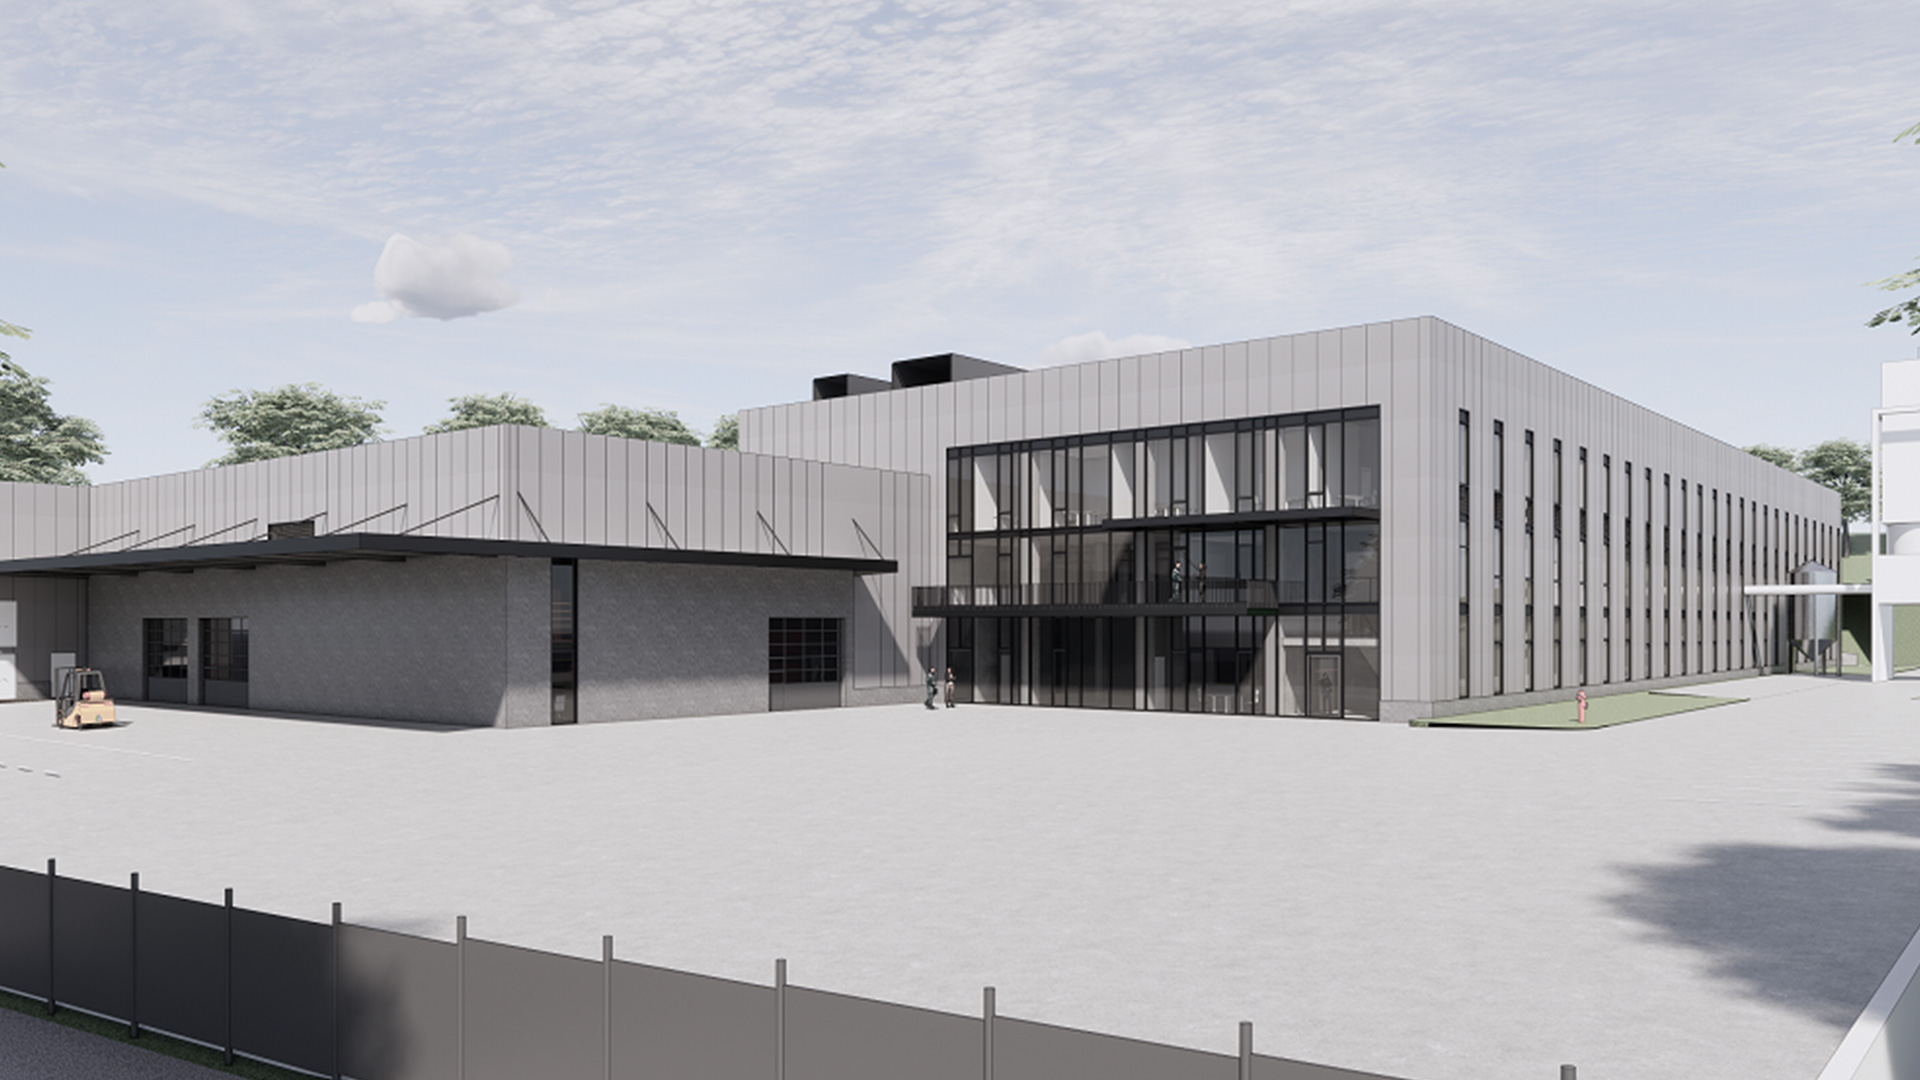 Expansion continues in Einbeck: Construction work for the new building has started